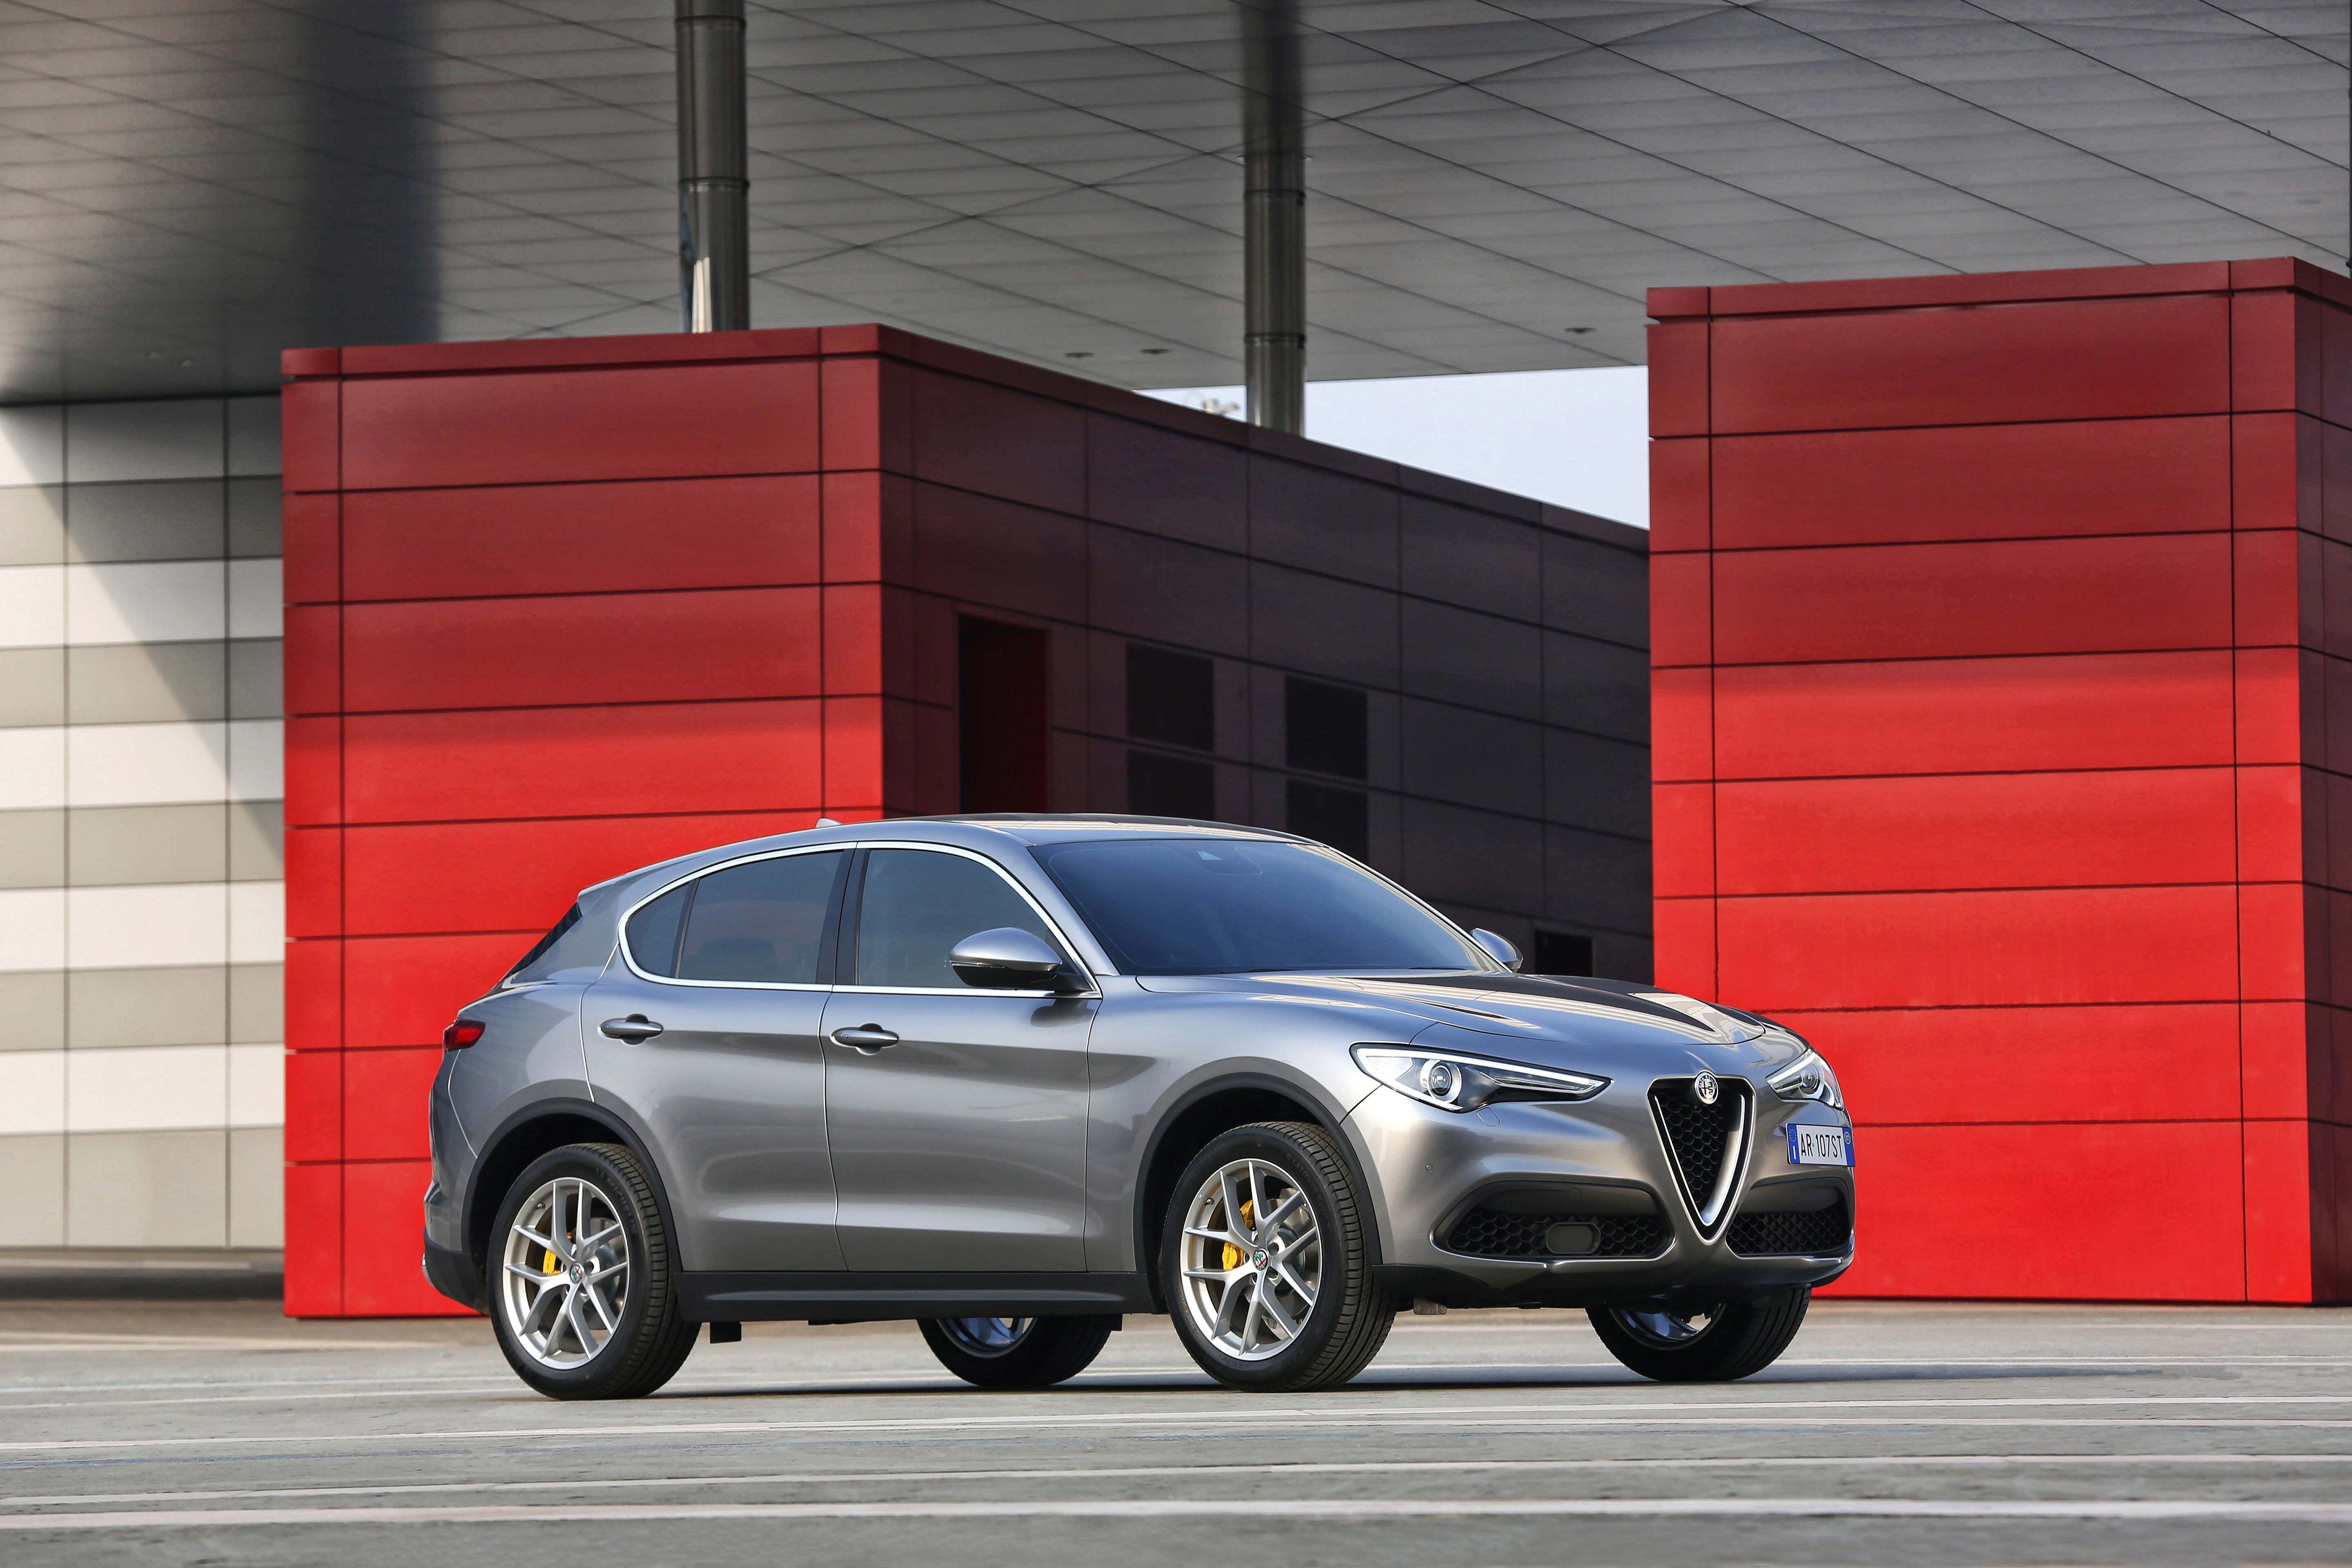 Alfa Romeo announces full engine specs and prices of the Stelvio SUV -  CarWale